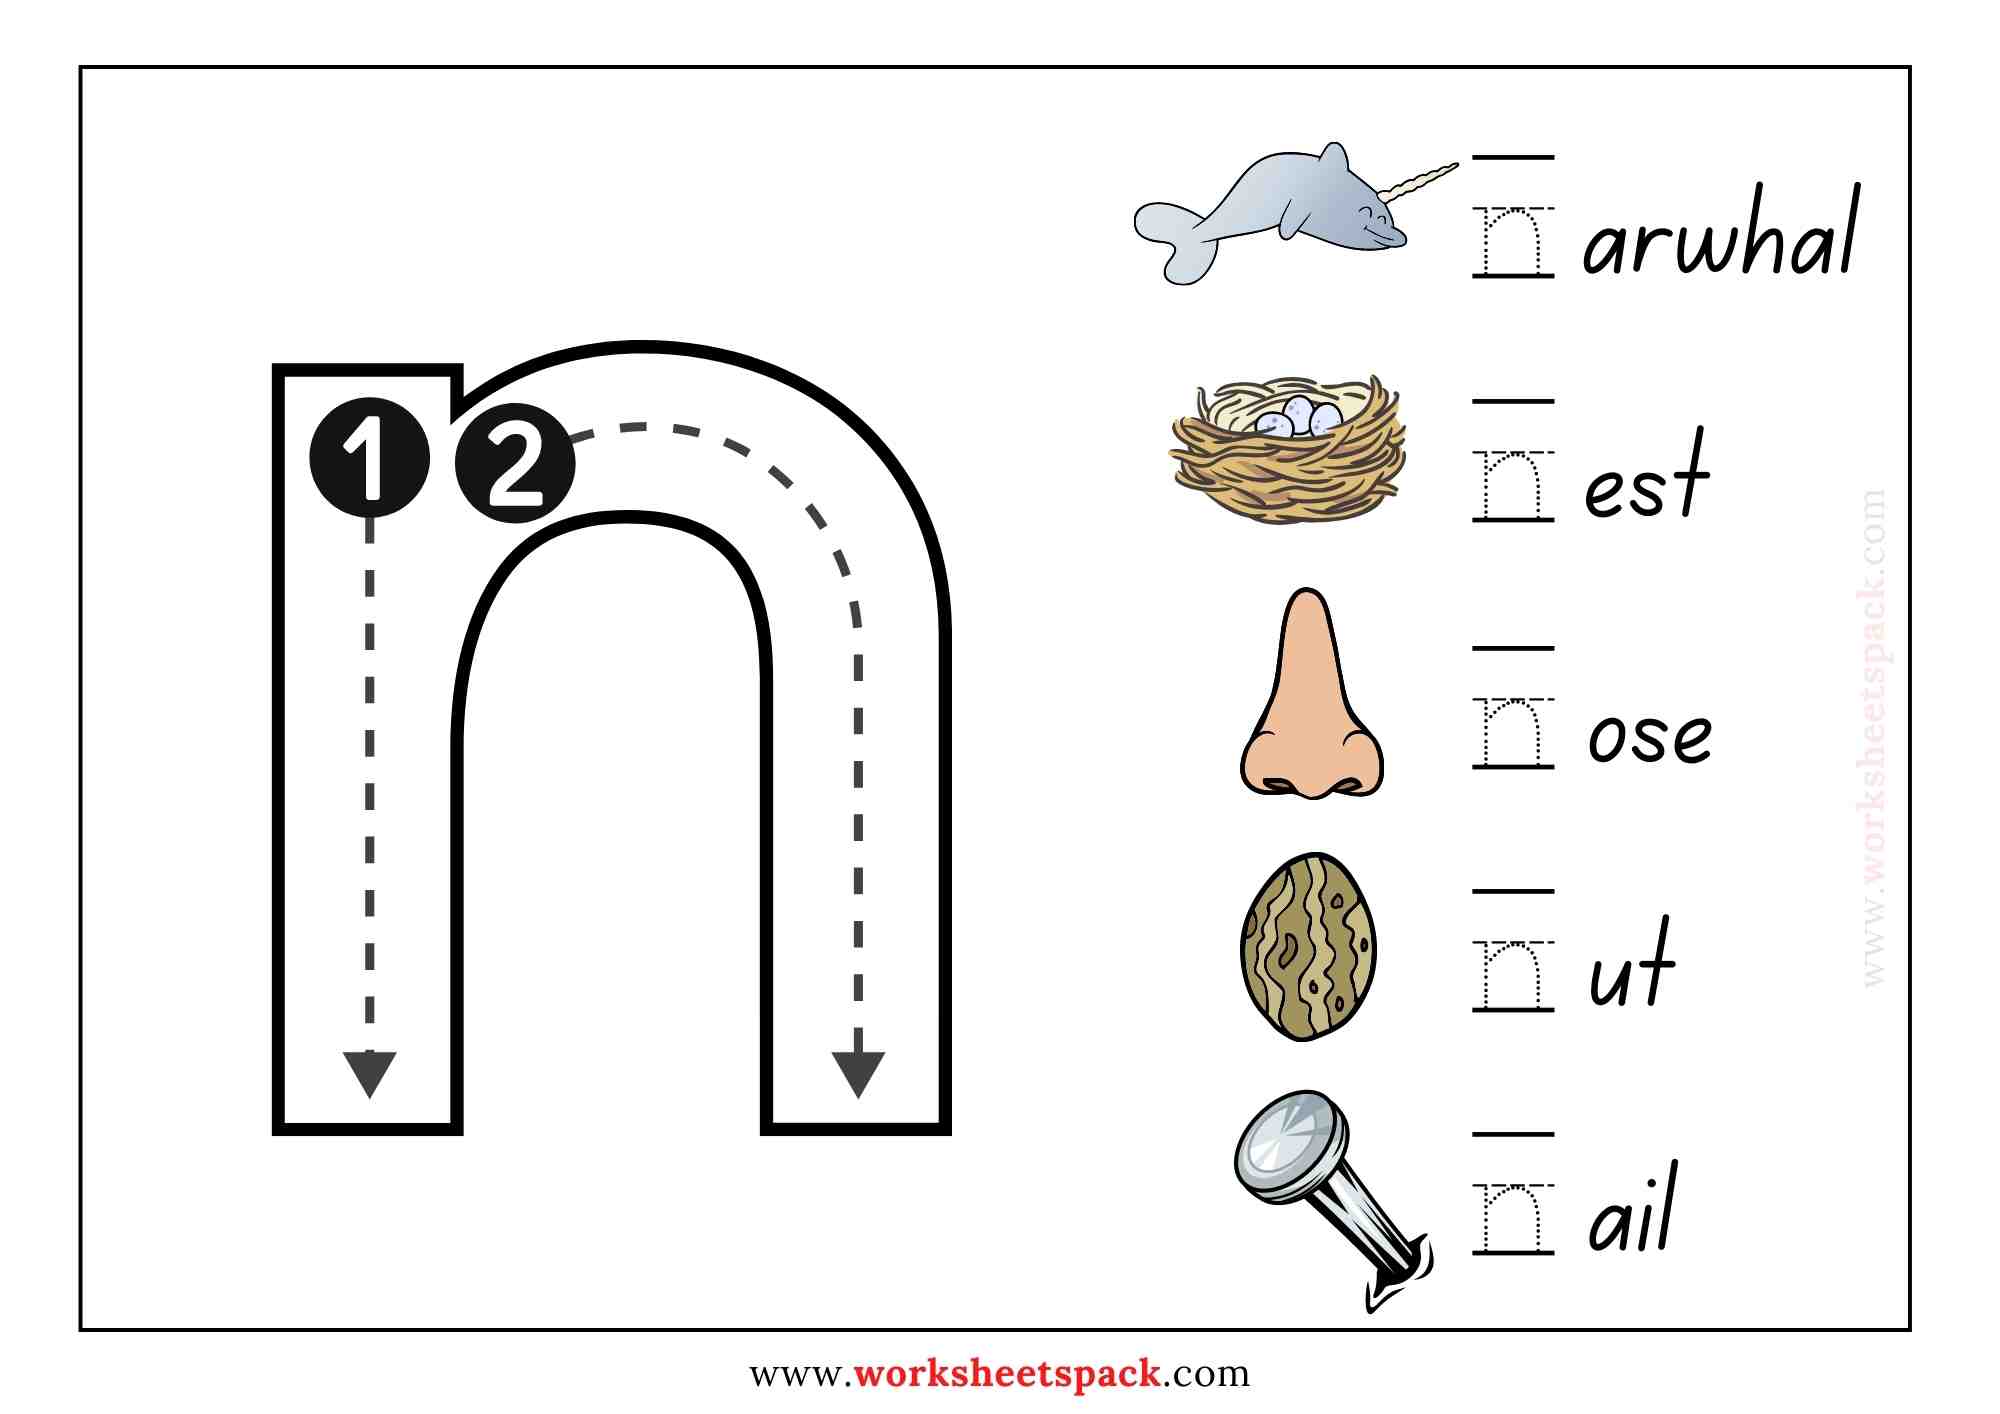 free-small-letter-tracing-worksheets-worksheetspack